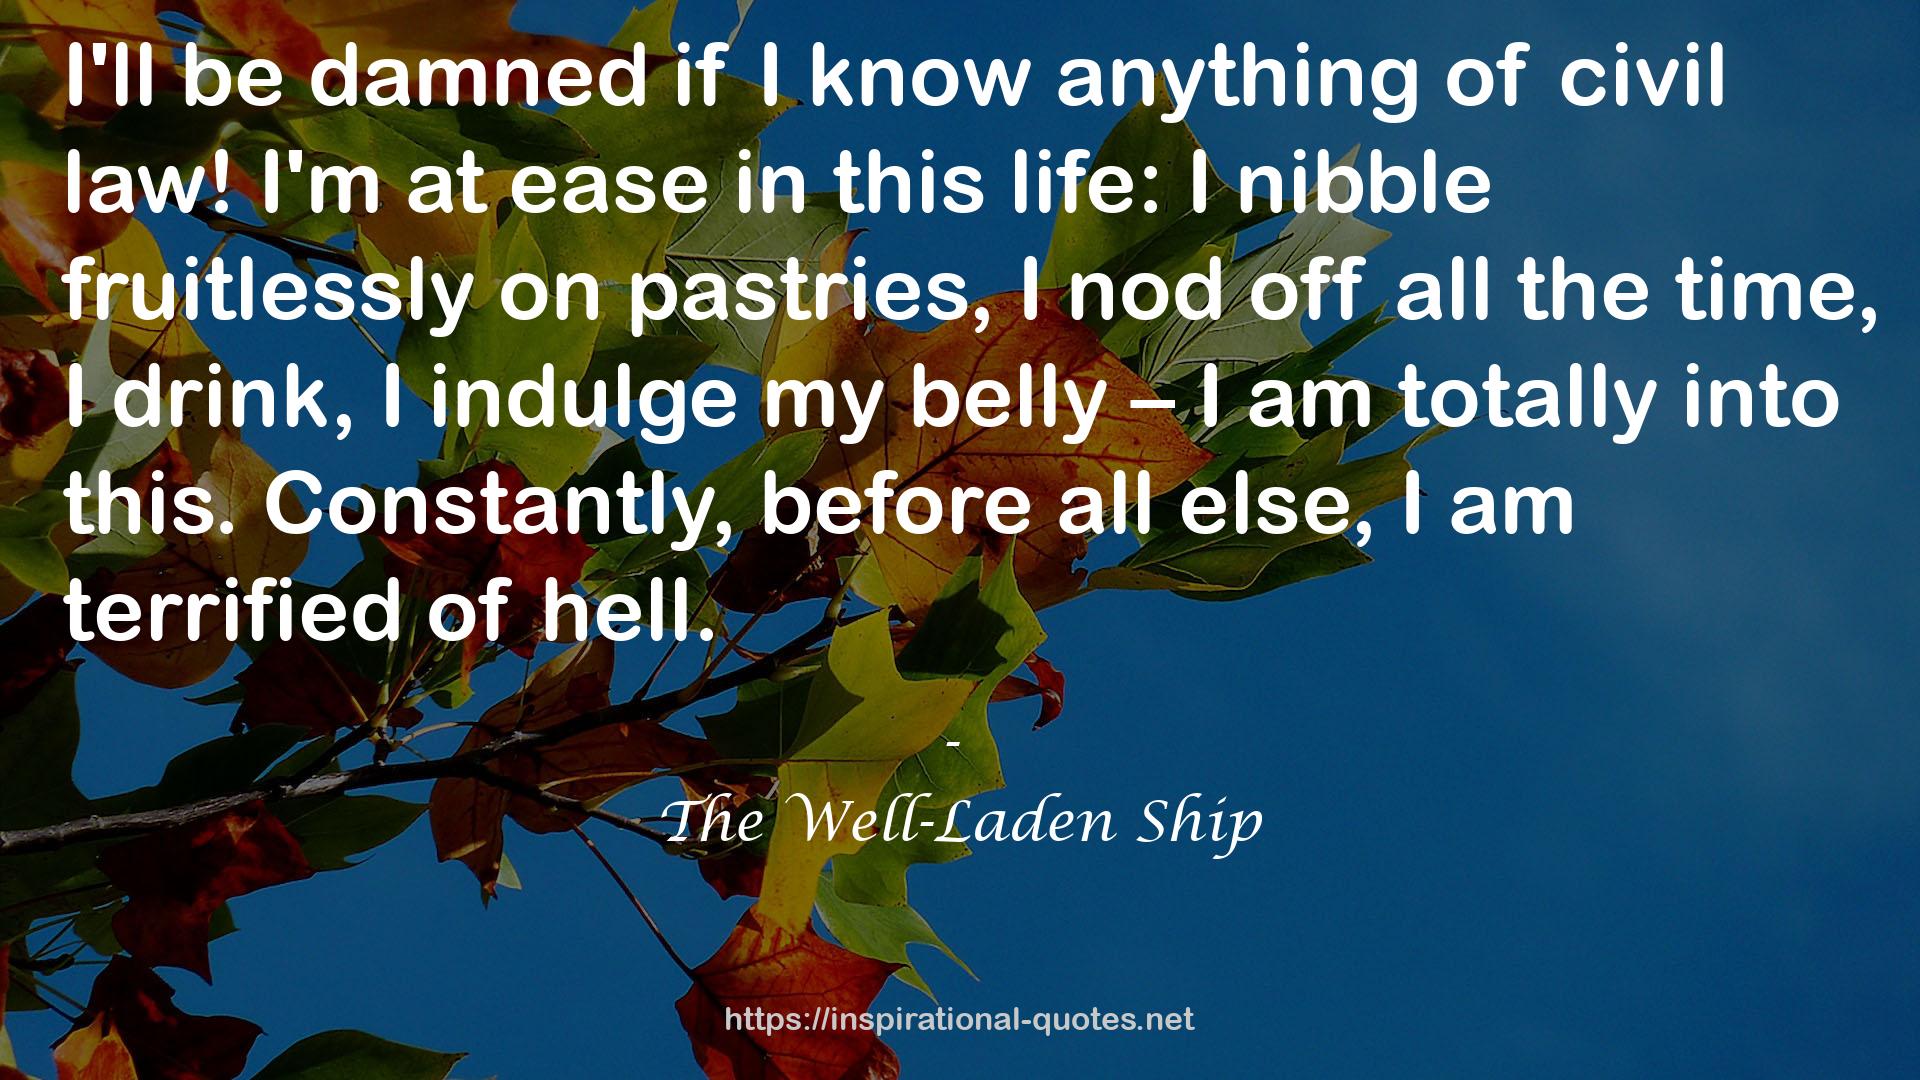 The Well-Laden Ship QUOTES